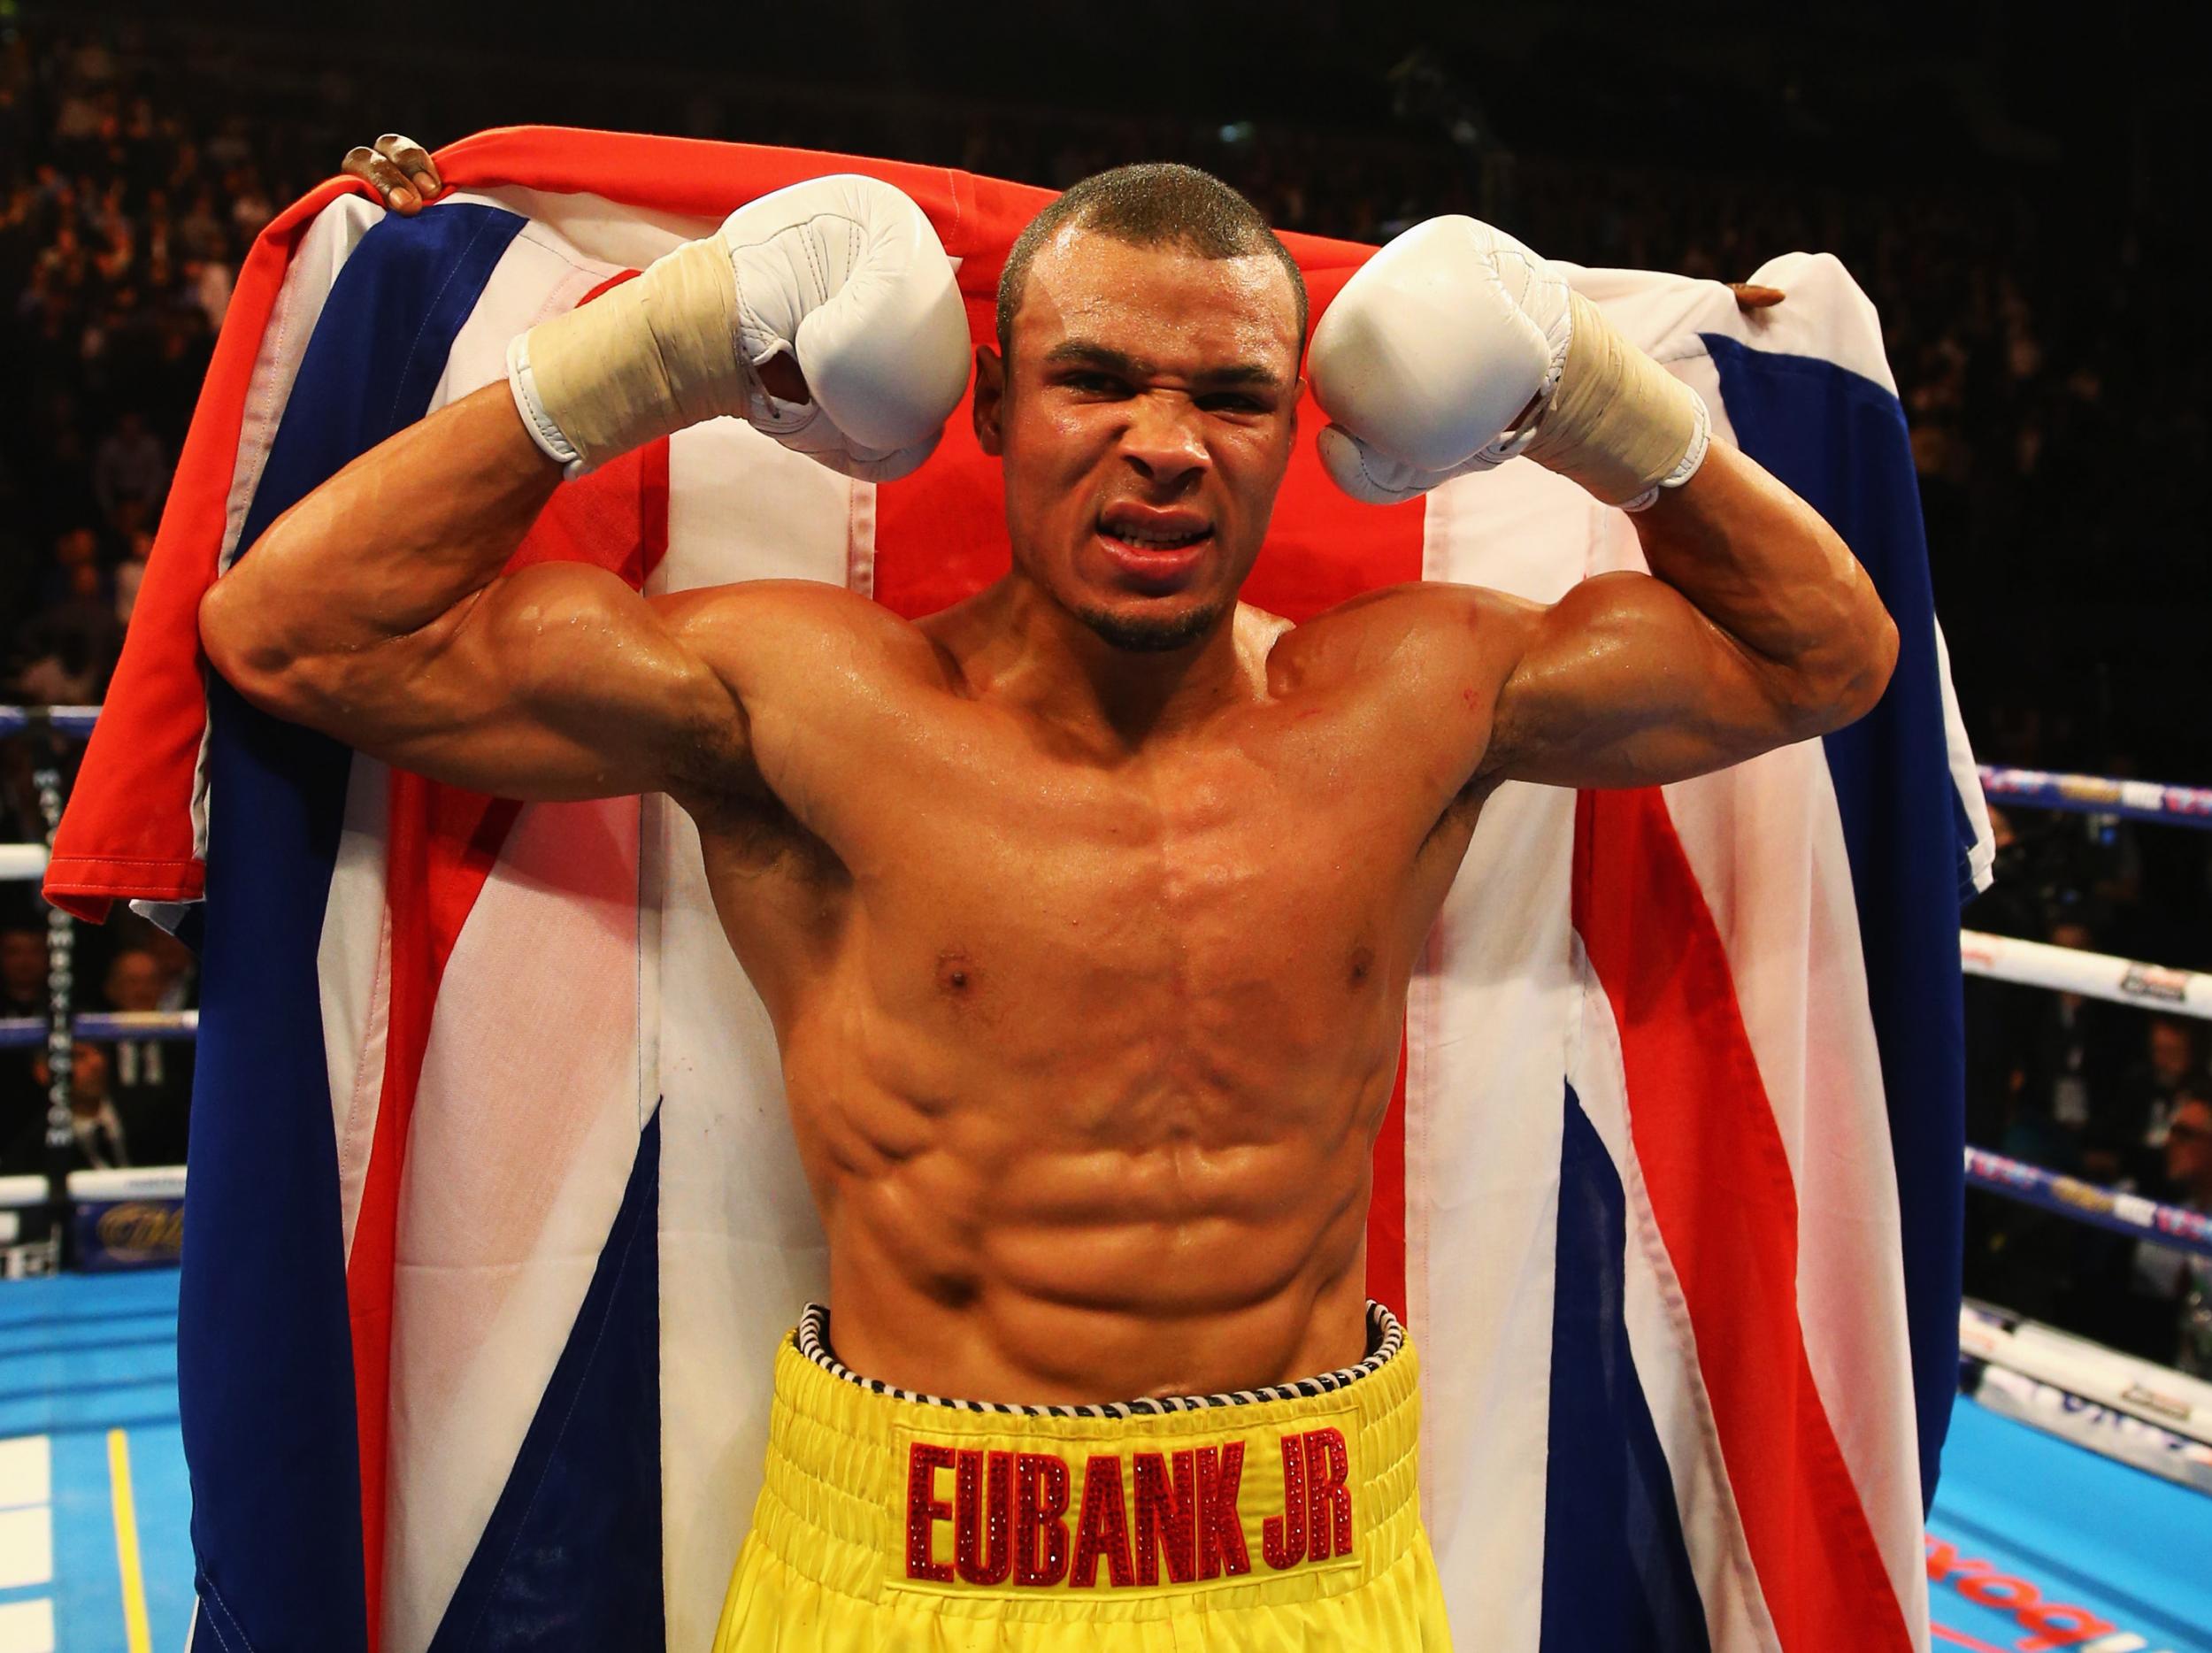 Eubank Jr. is following in his father's polarising steps?(Getty )